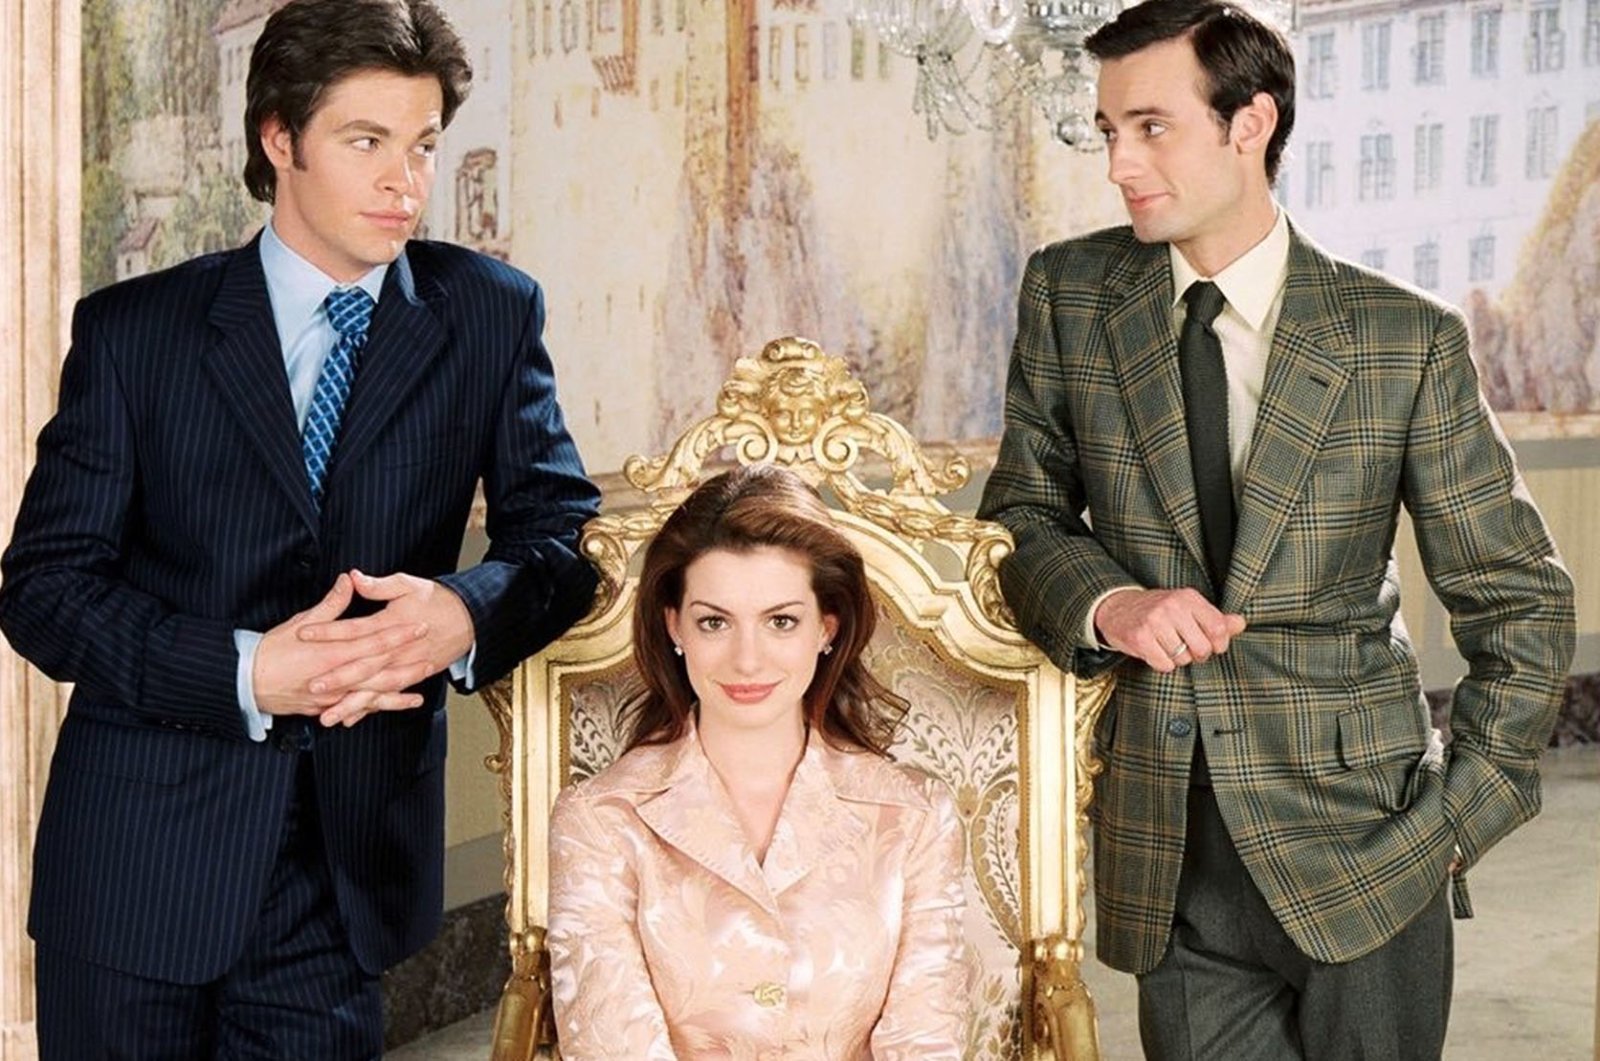 Anne Hathaway Chris Pine in The Princess Diaries 2 Royal Engagement